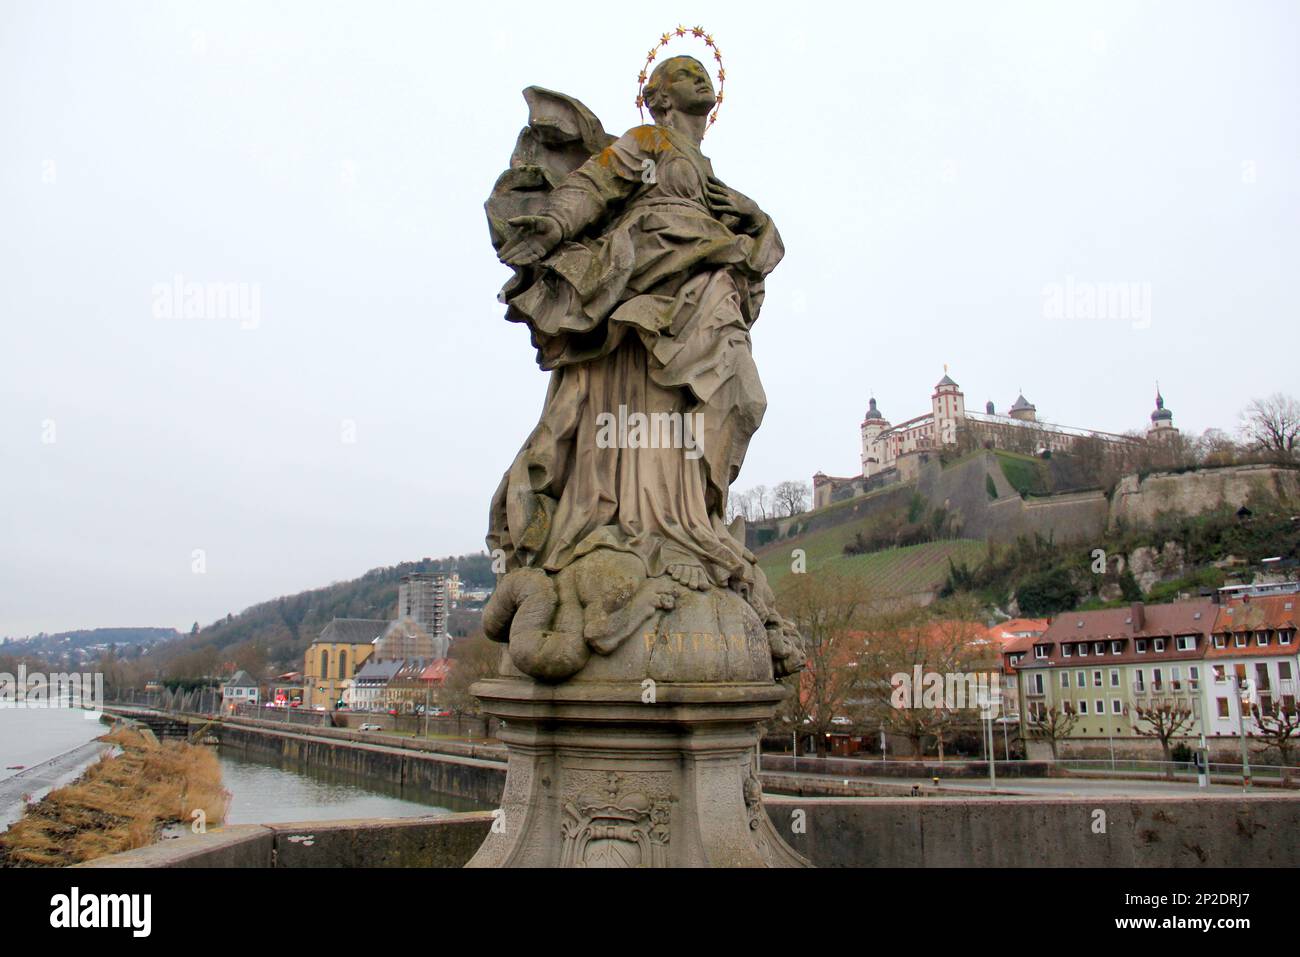 Blessed Virgin Mary, as Patrona Franconiae, statue on the Old Main Bridge, Alte Mainbruecke, Marienberg Fortress on a hill in the background, Wurzburg Stock Photo